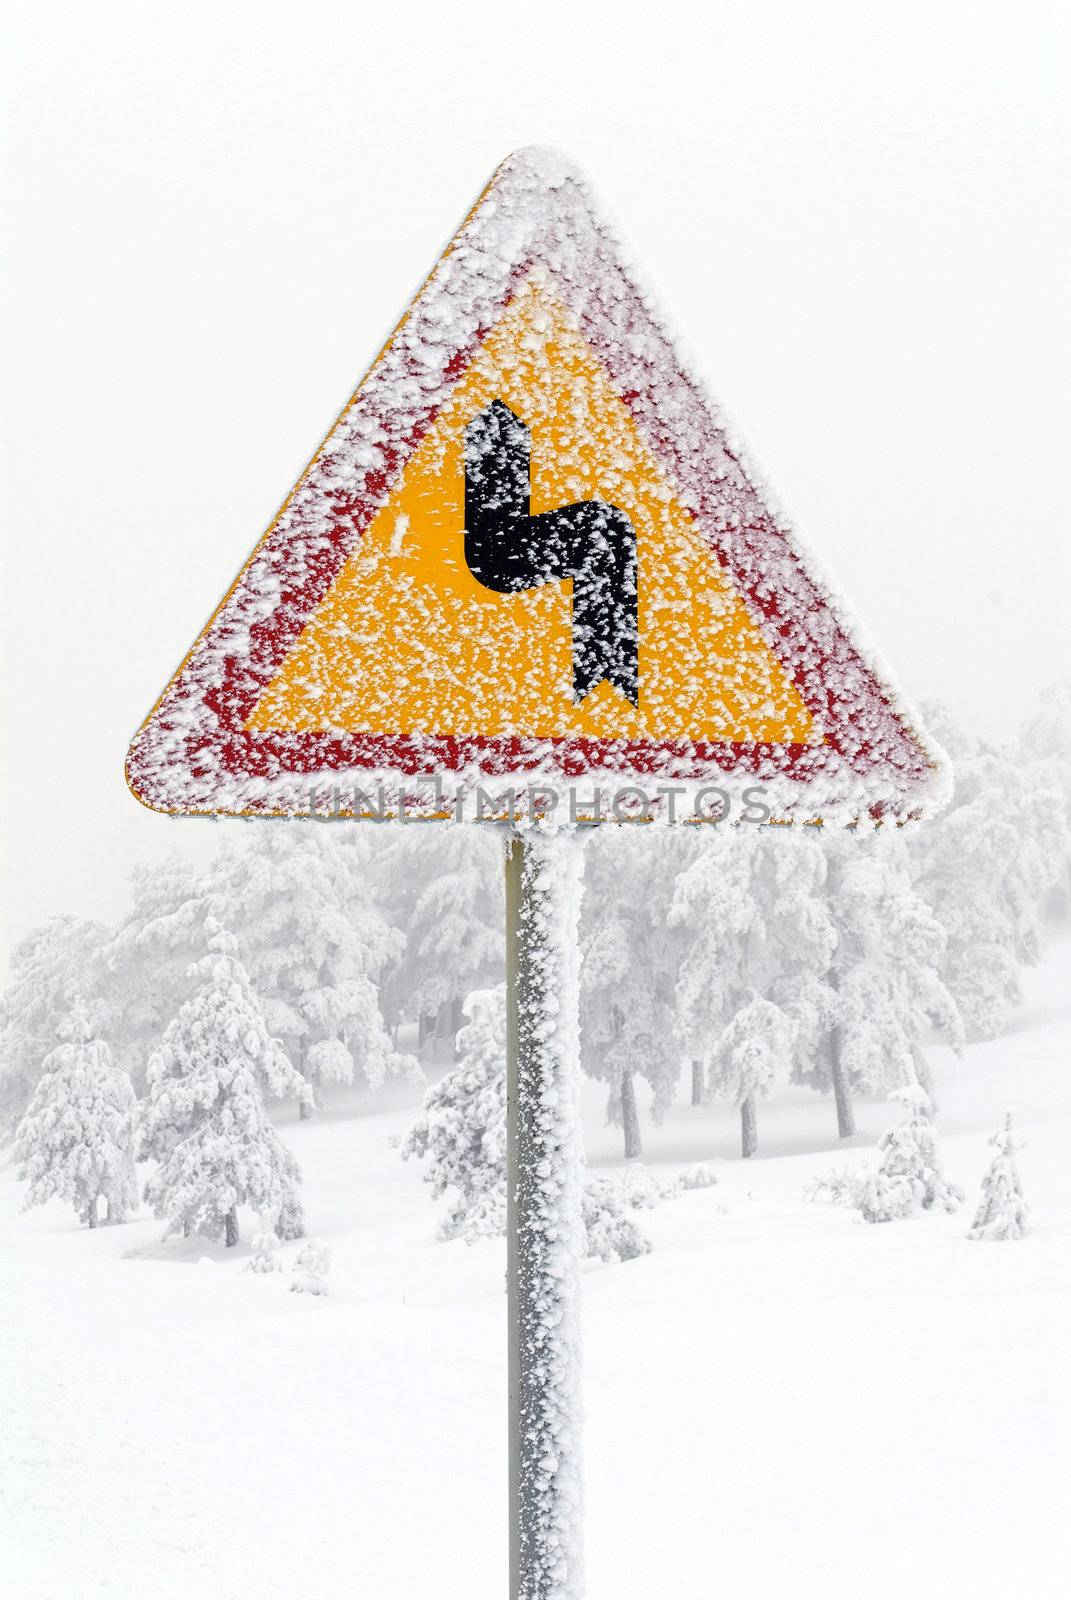 Traffic road sign in snow by adamr